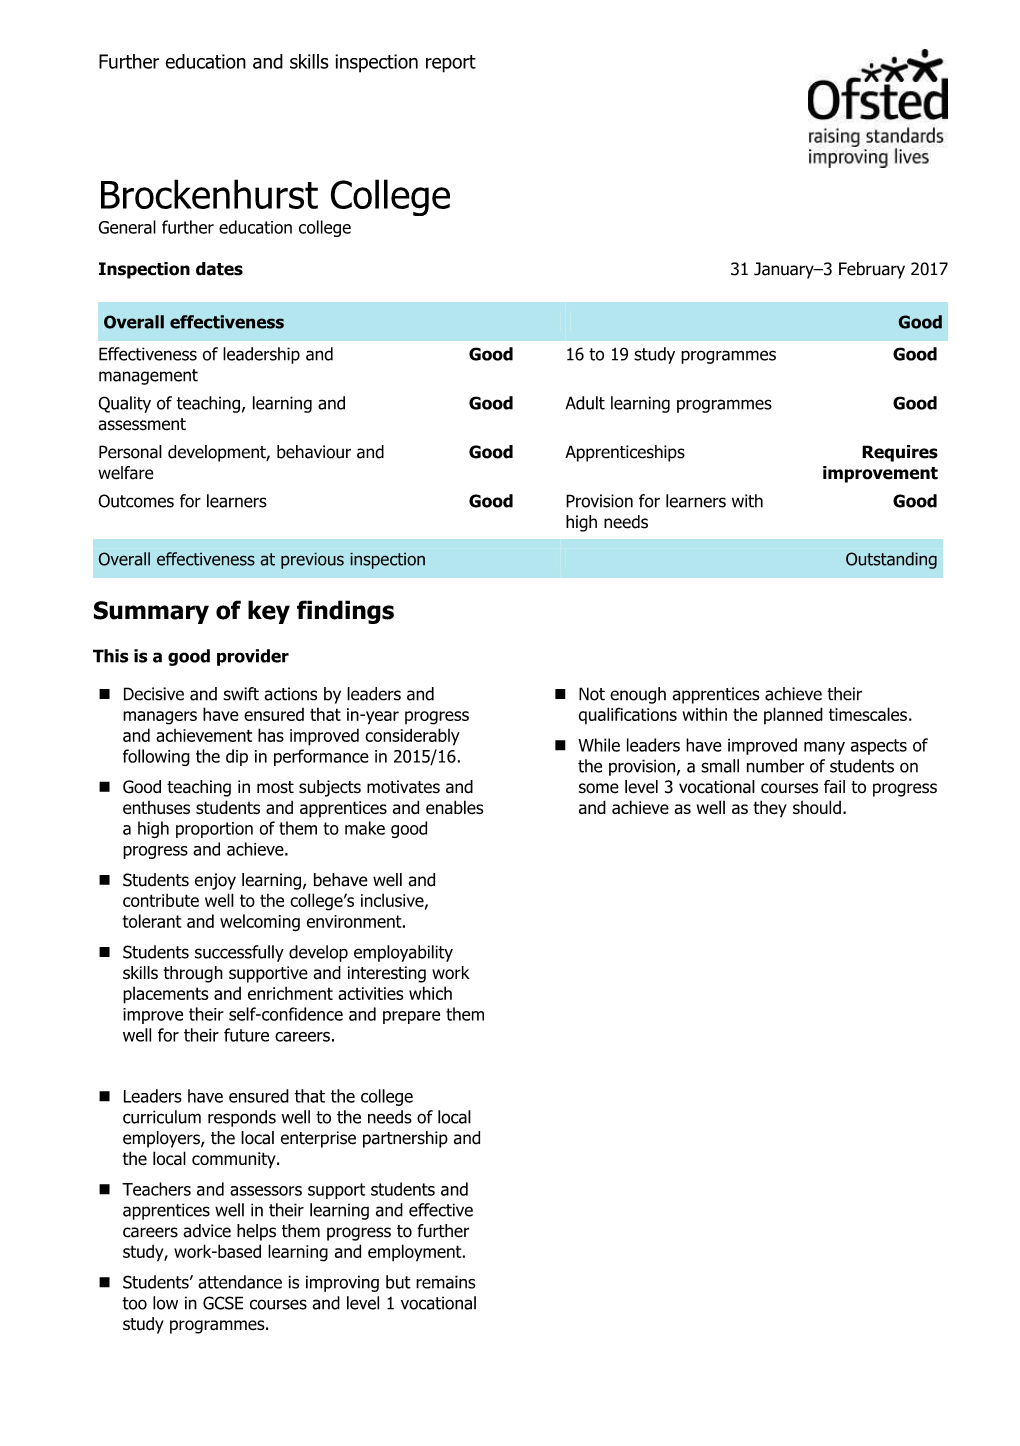 Download the Most Recent Ofsted Report